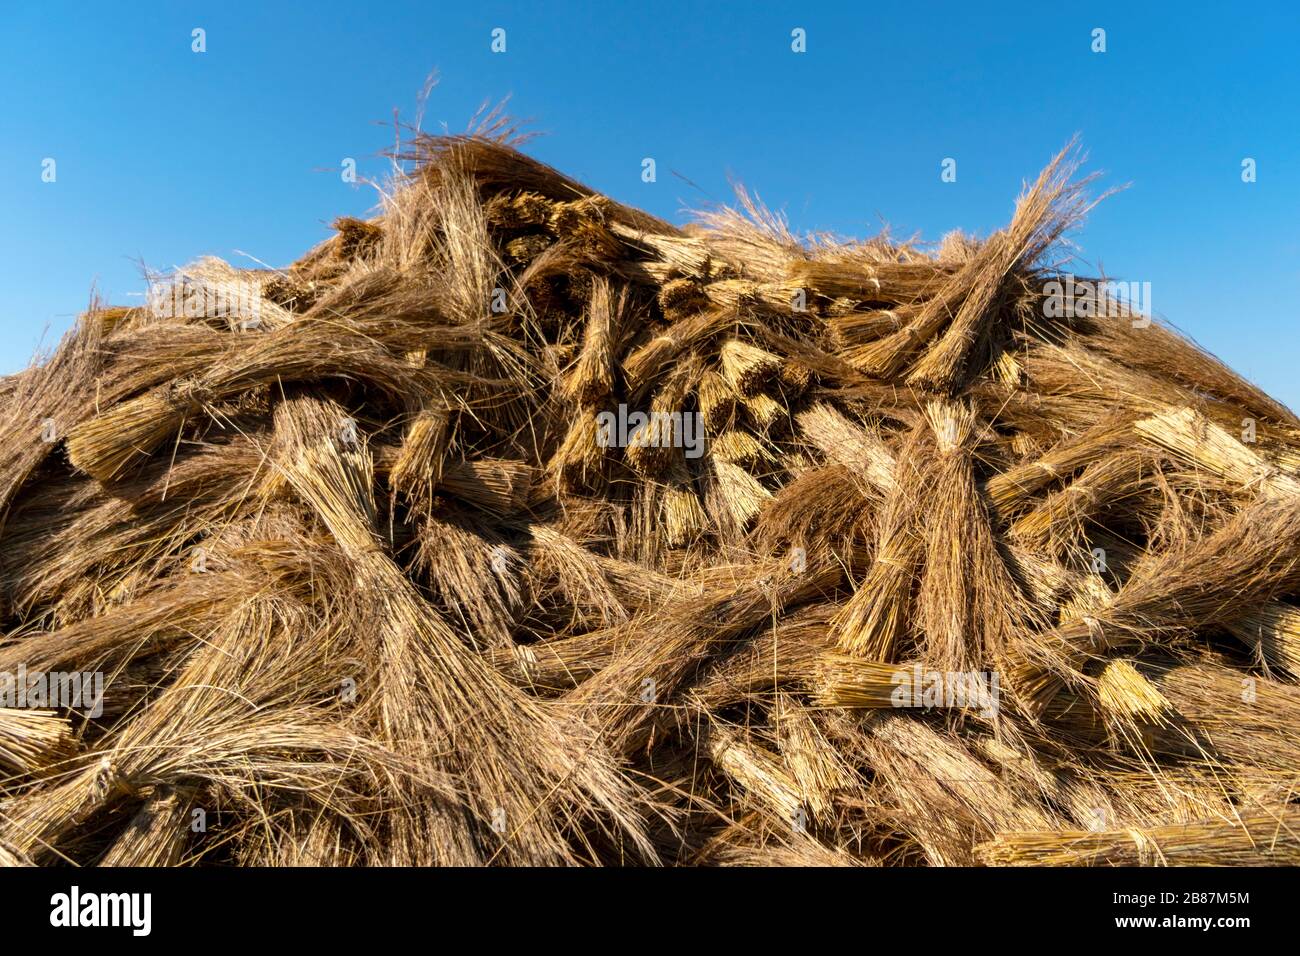 Plenty of thatch prepared for the roof in Eswatini, Africa Stock Photo